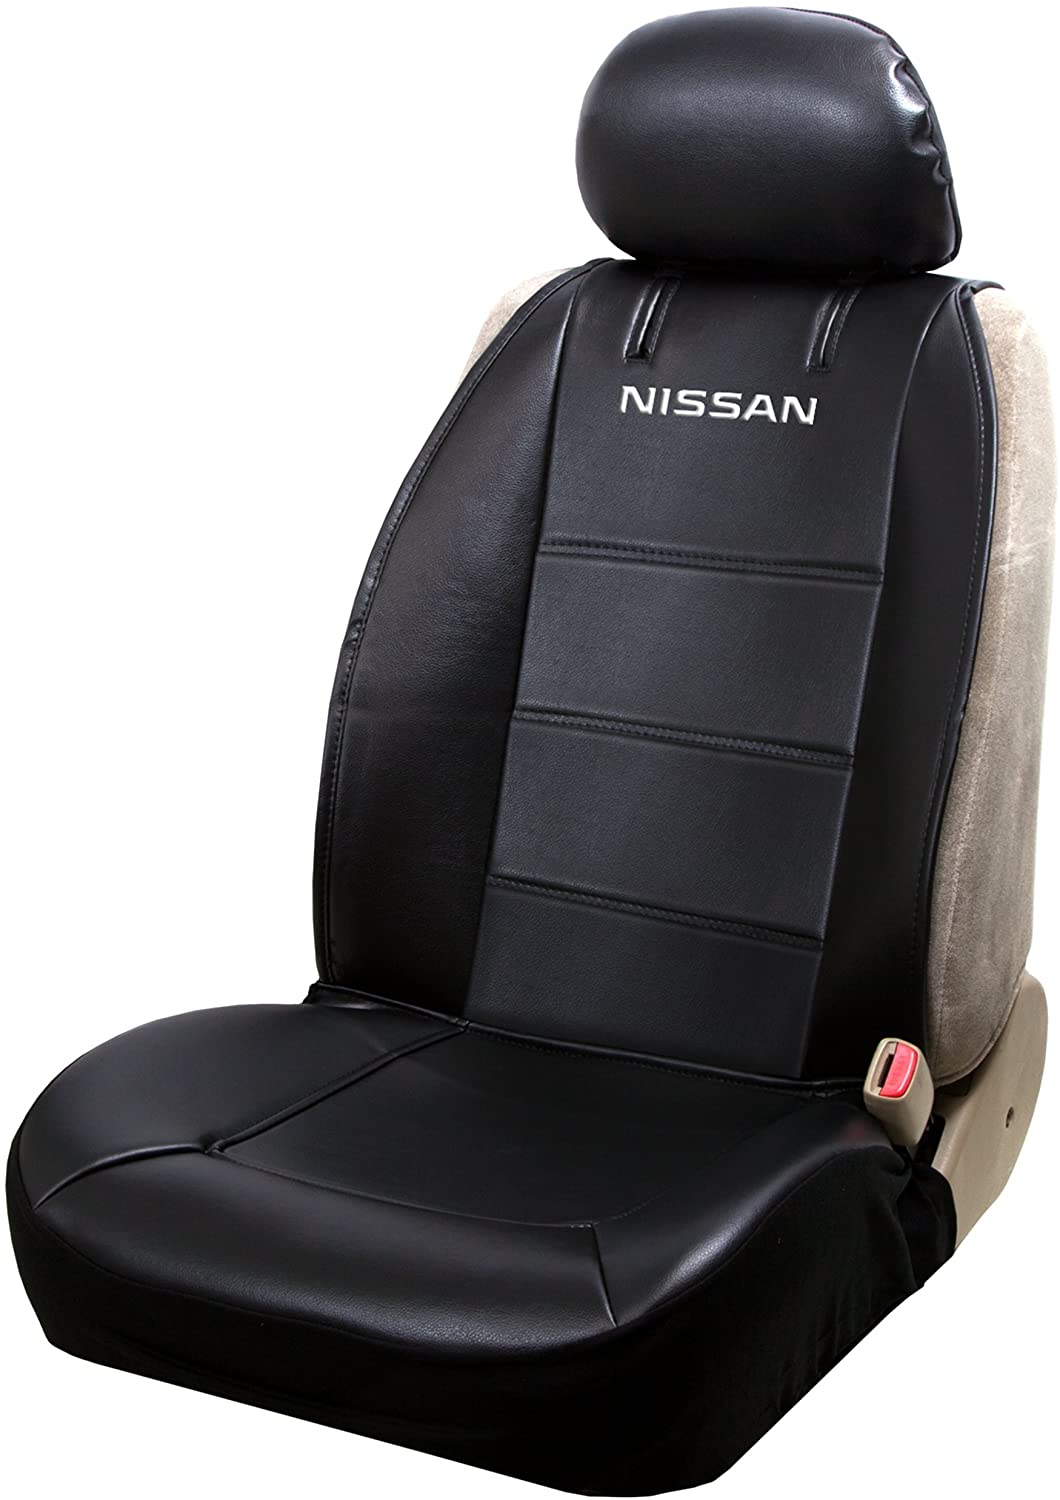 Nissan Rogue Seat Covers - www.inf-inet.com